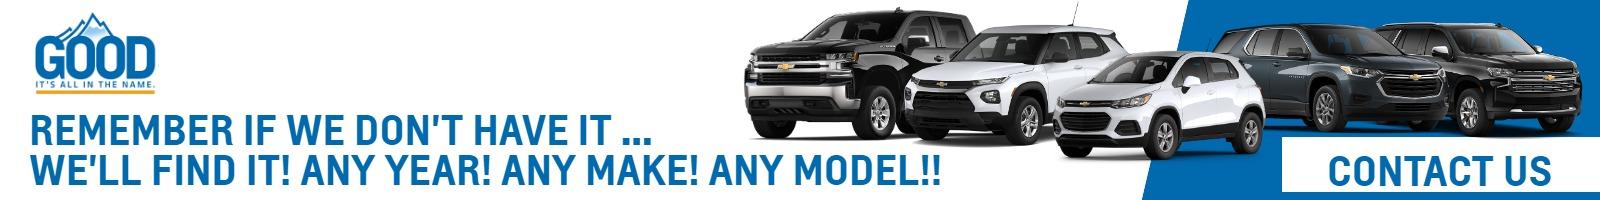 Used, Certified Vehicles for Sale in RENTON, WA | Good Chevrolet